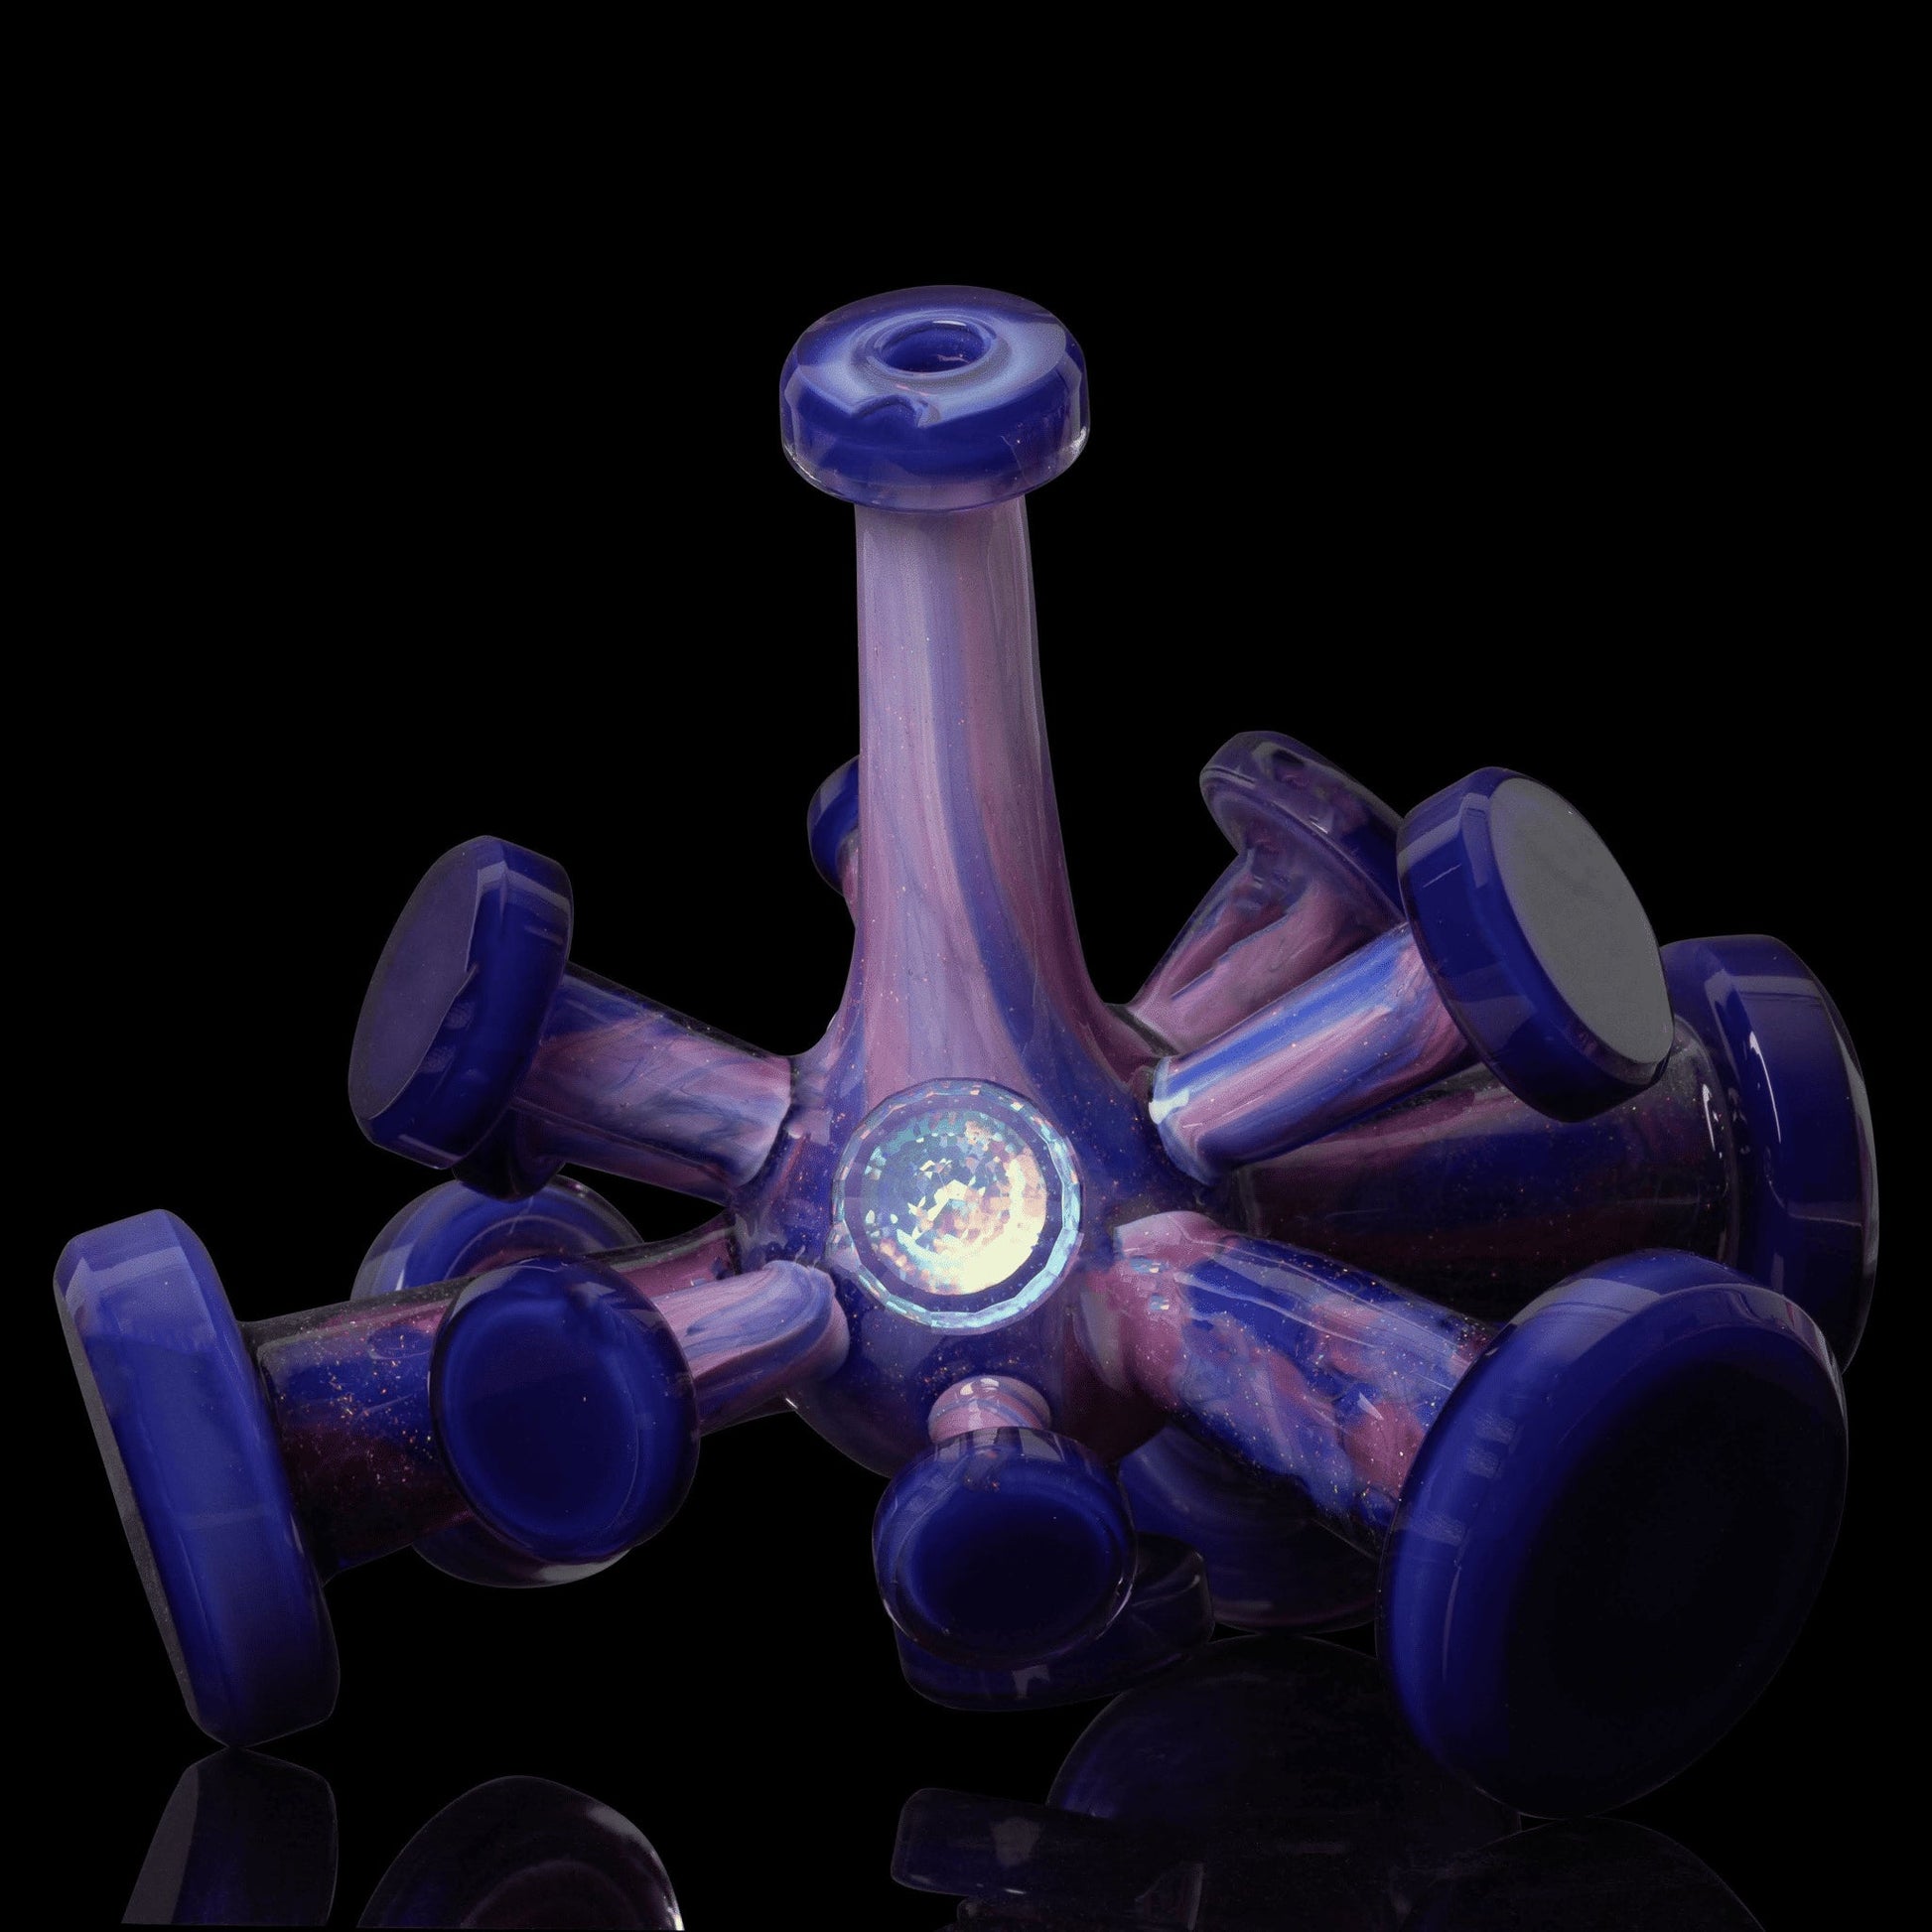 sophisticated design of the Collab Spore Rig by JMass x Scomo Moanet (Scribble Season 2022)